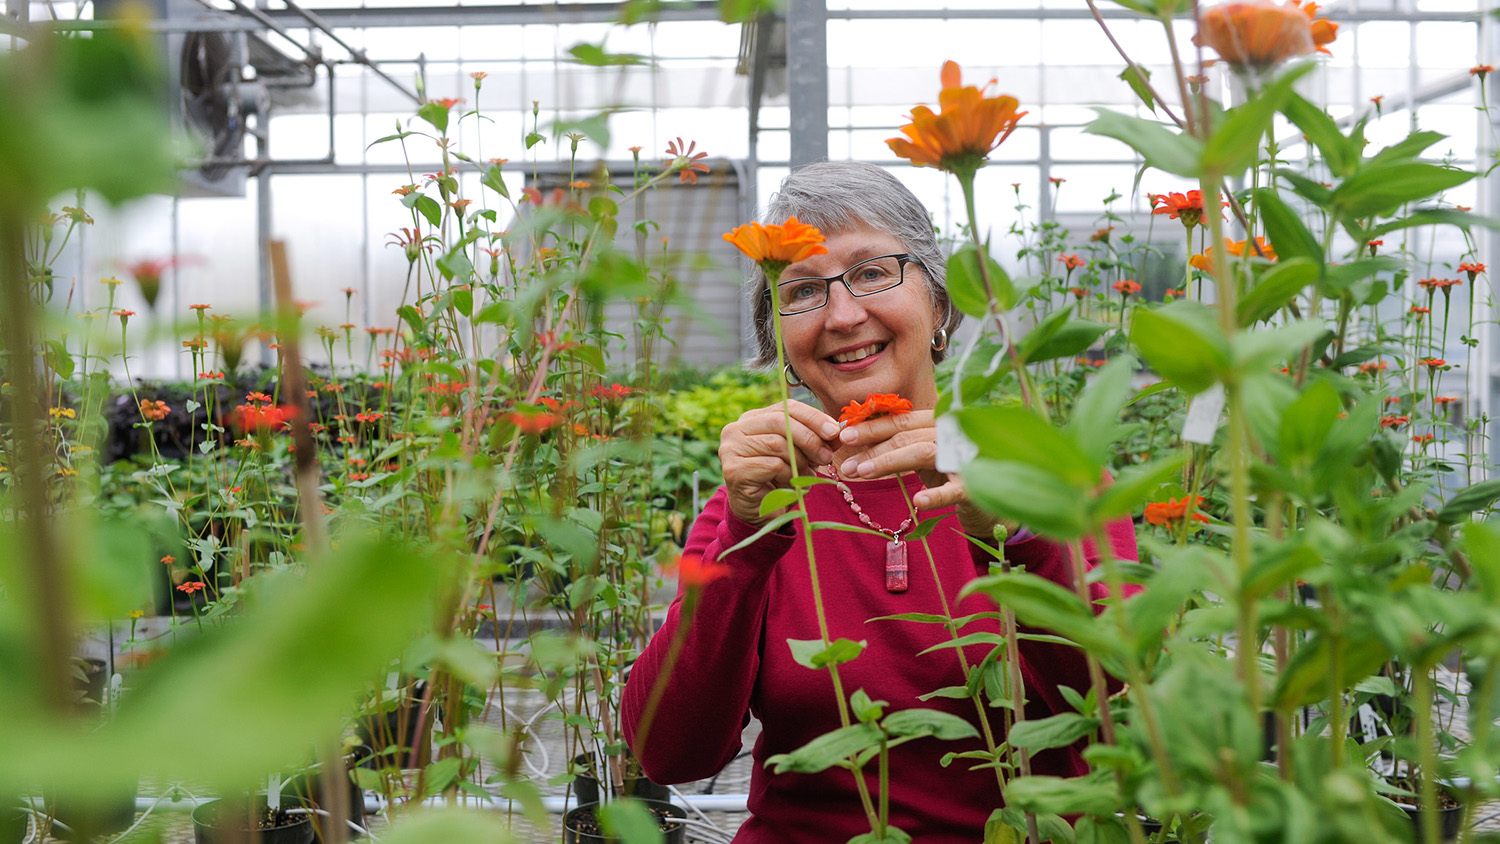 Woman in greenhouse smiling among orange flowers